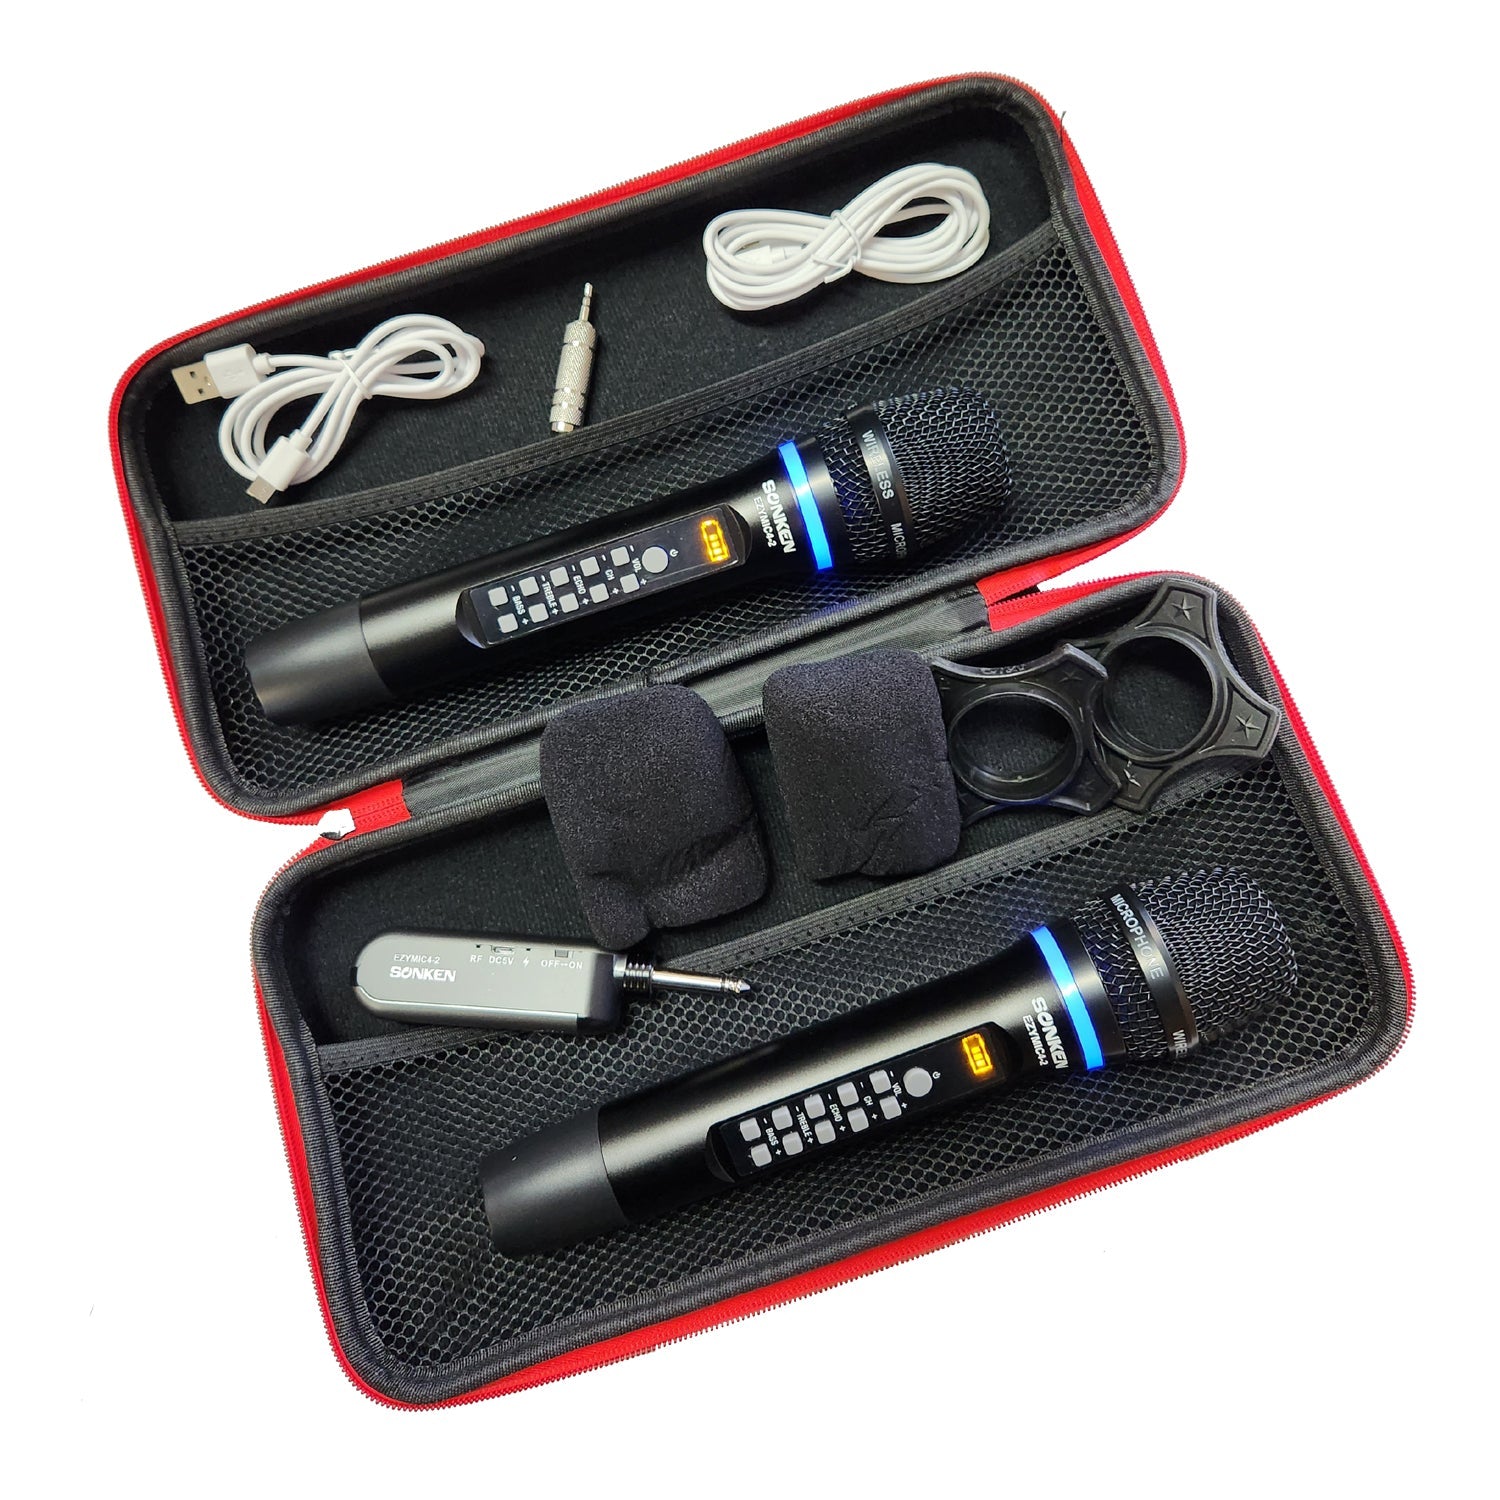 Compact Carry Case for 2x Wireless Microphones - Karaoke Home Entertainment